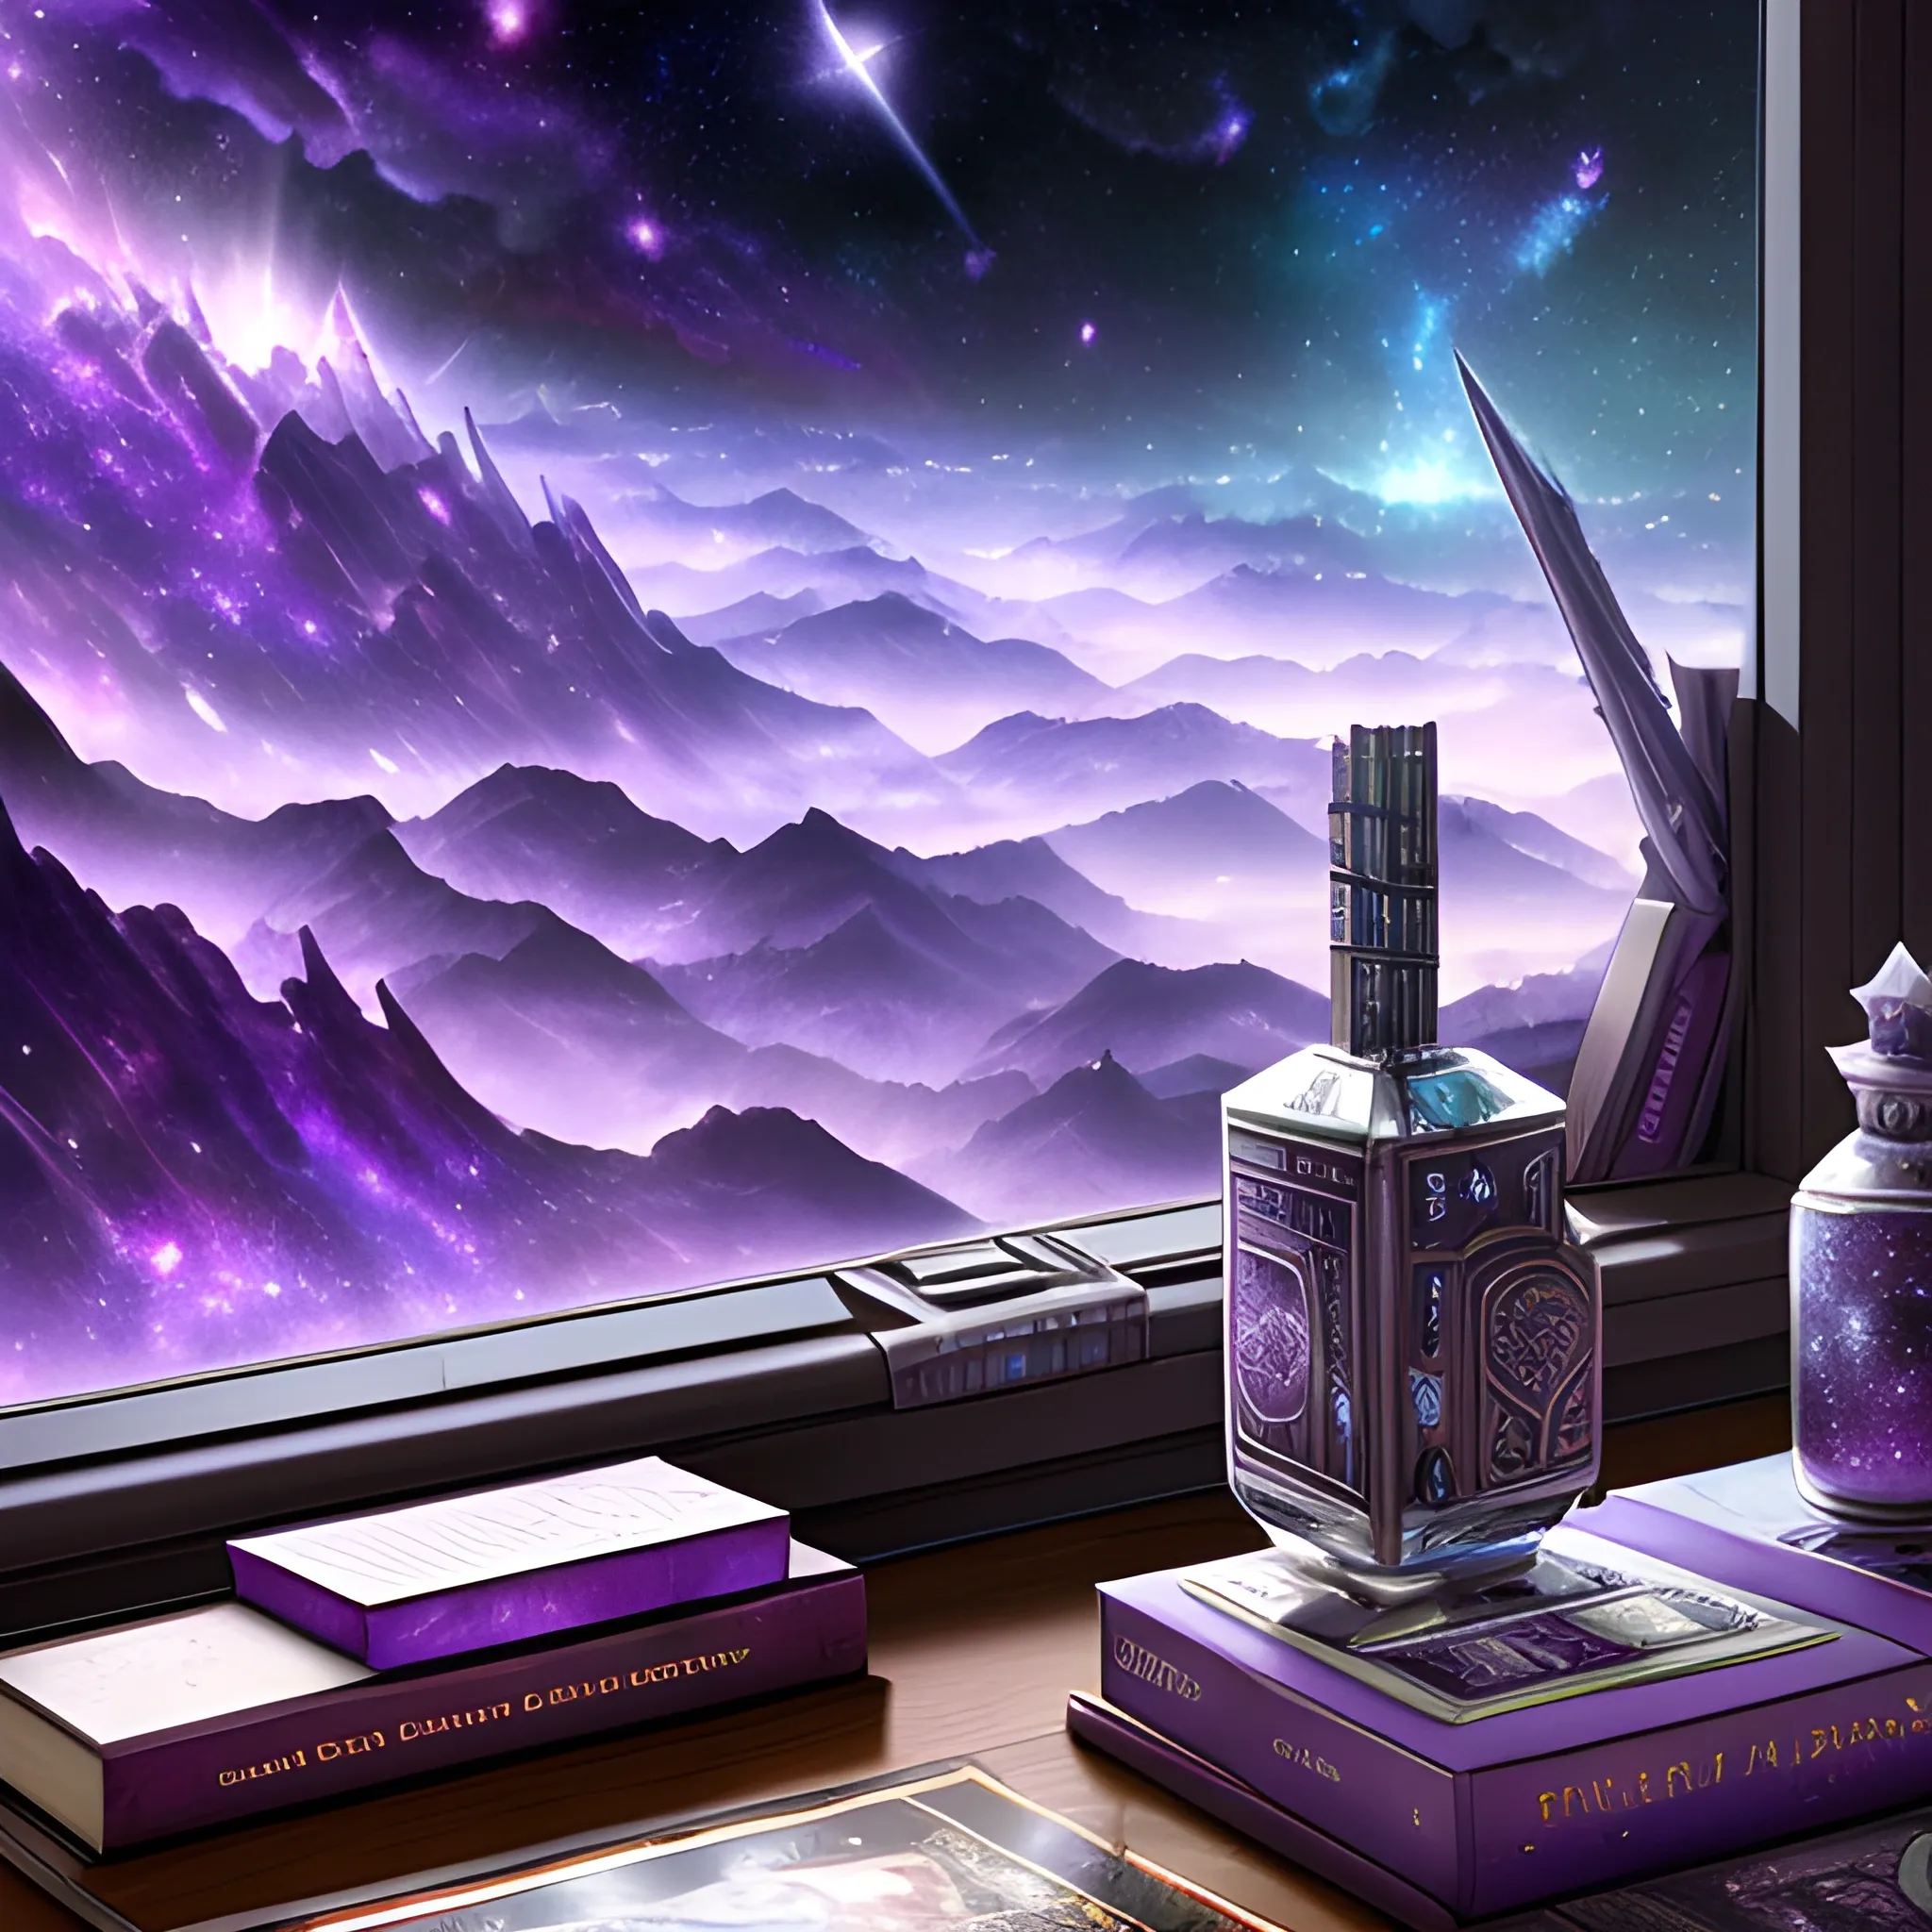 (((high detail))), best quality, (detailed), (high resolution) purple, silver universe, books, books on a table, shelf with some books, studio ghiblin, anime, galaxy in the sky,
, Trippy